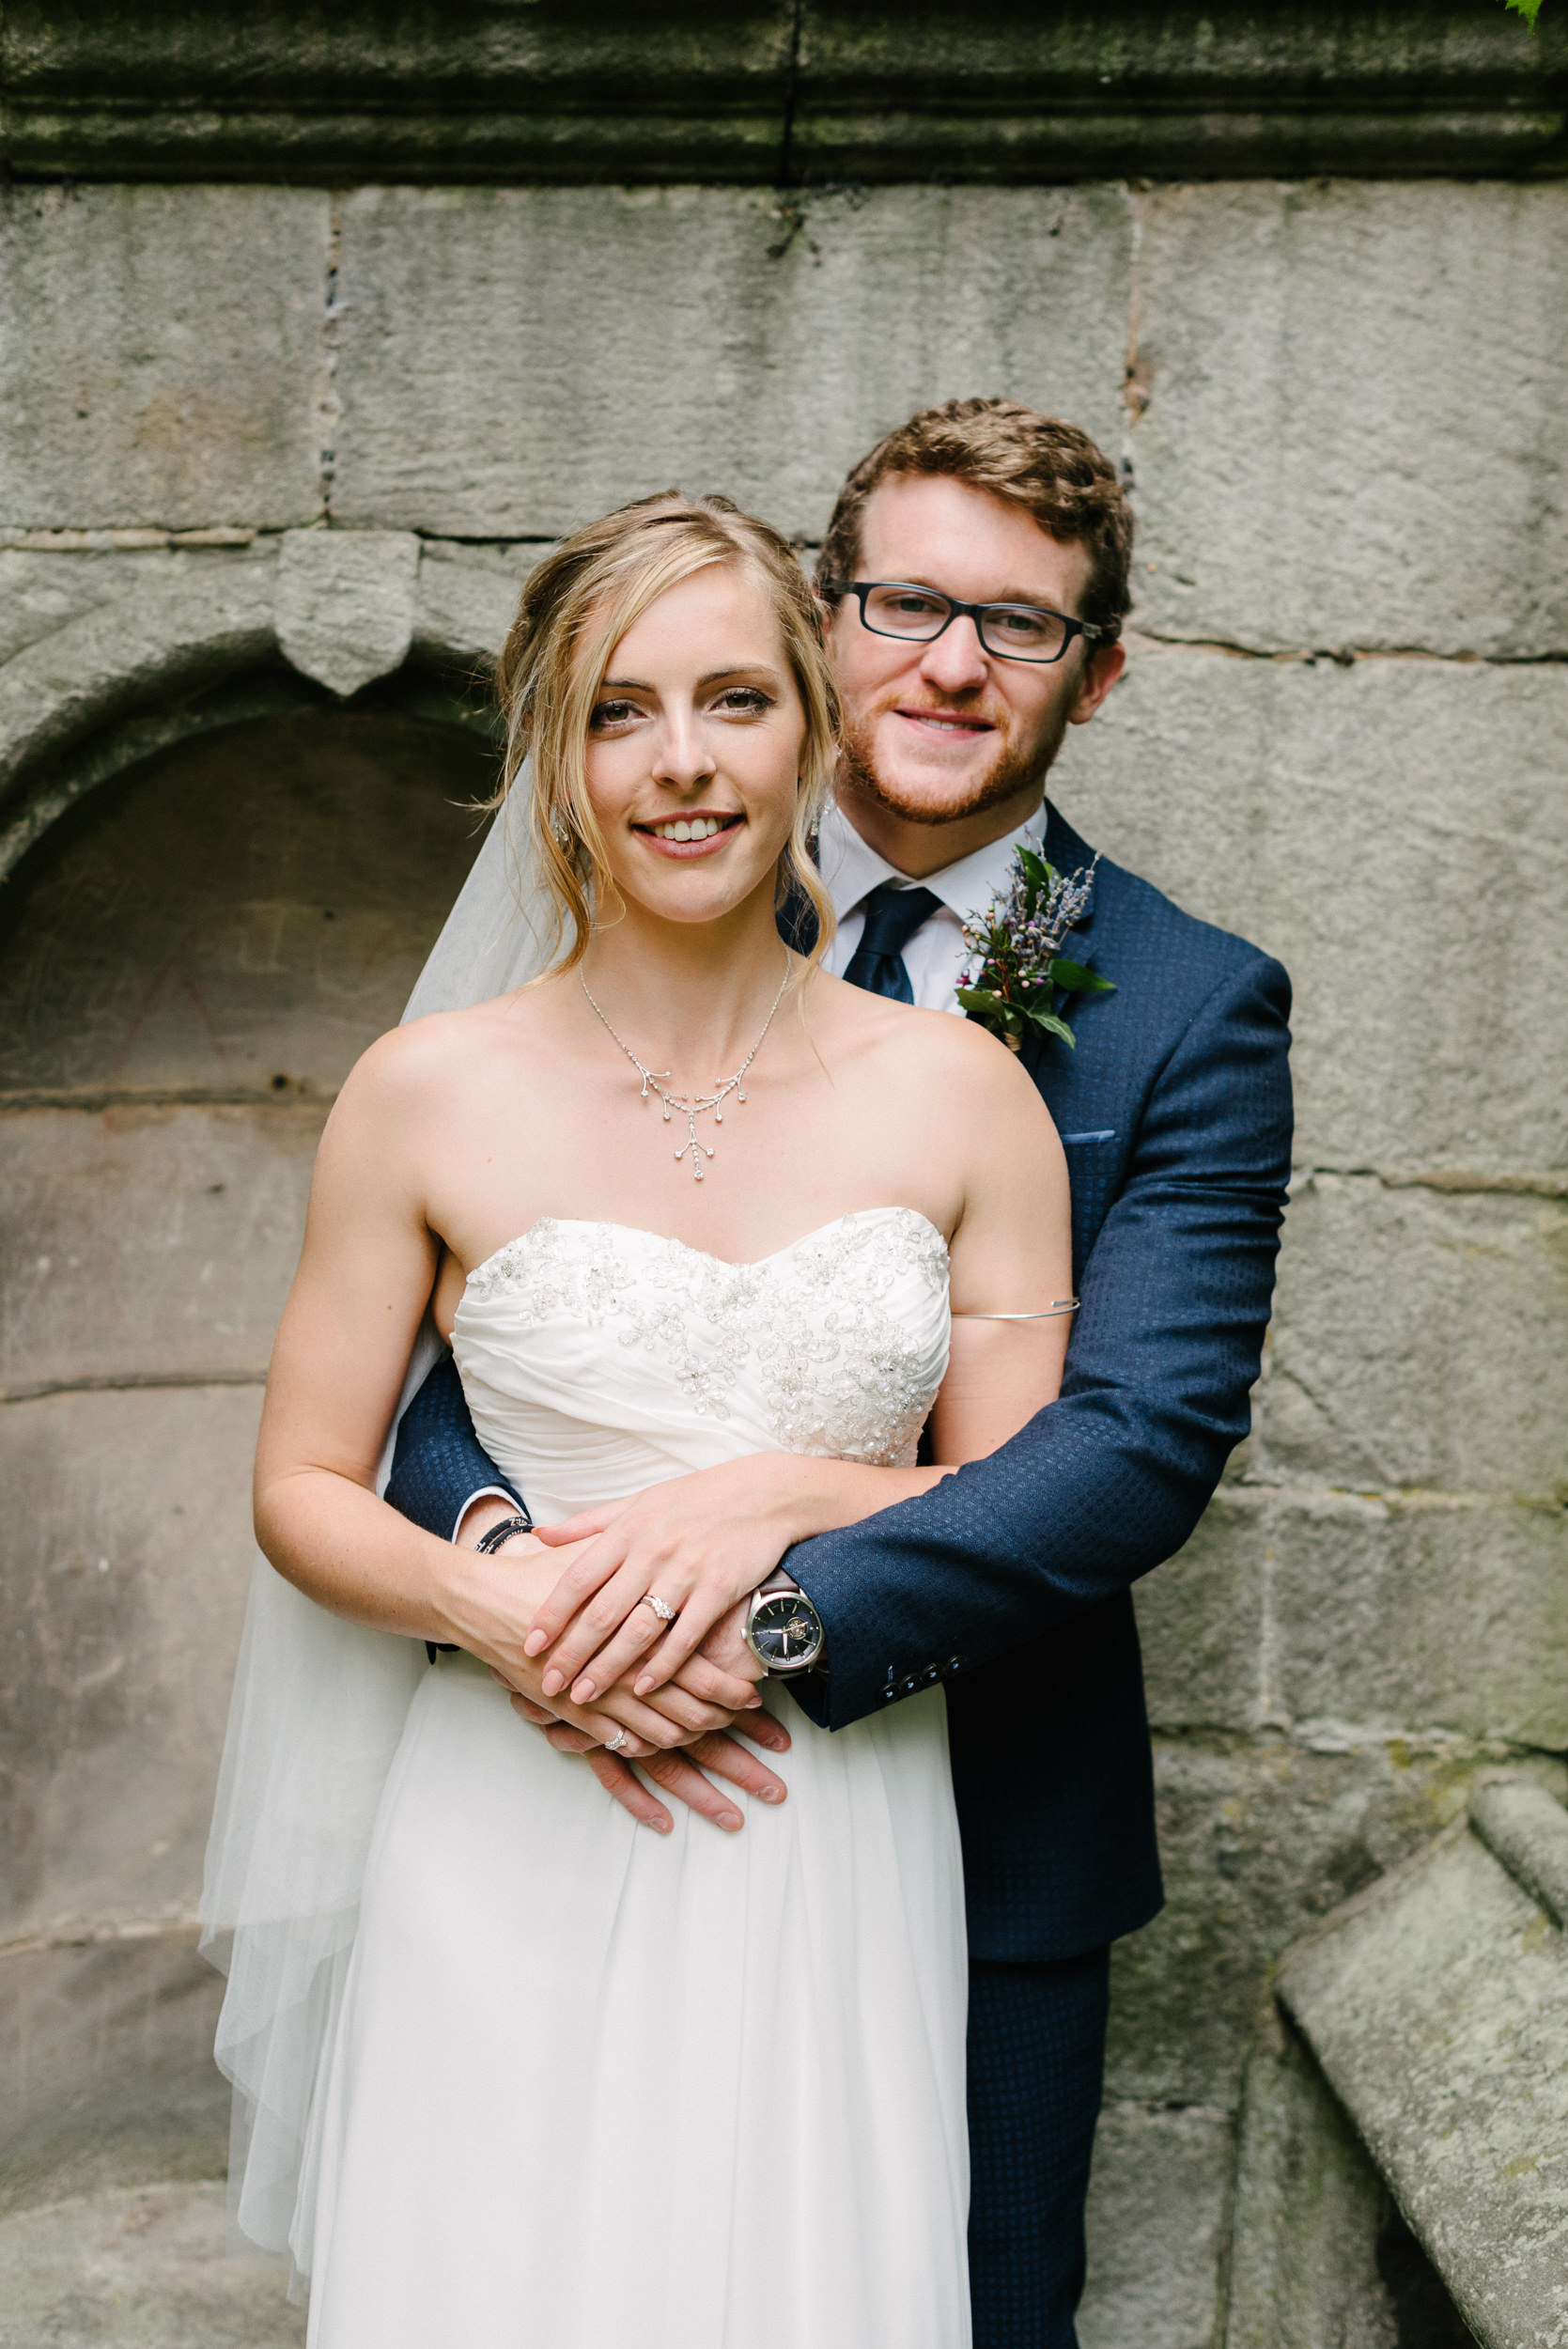 Bride and groom on their wedding day at Risley Hall